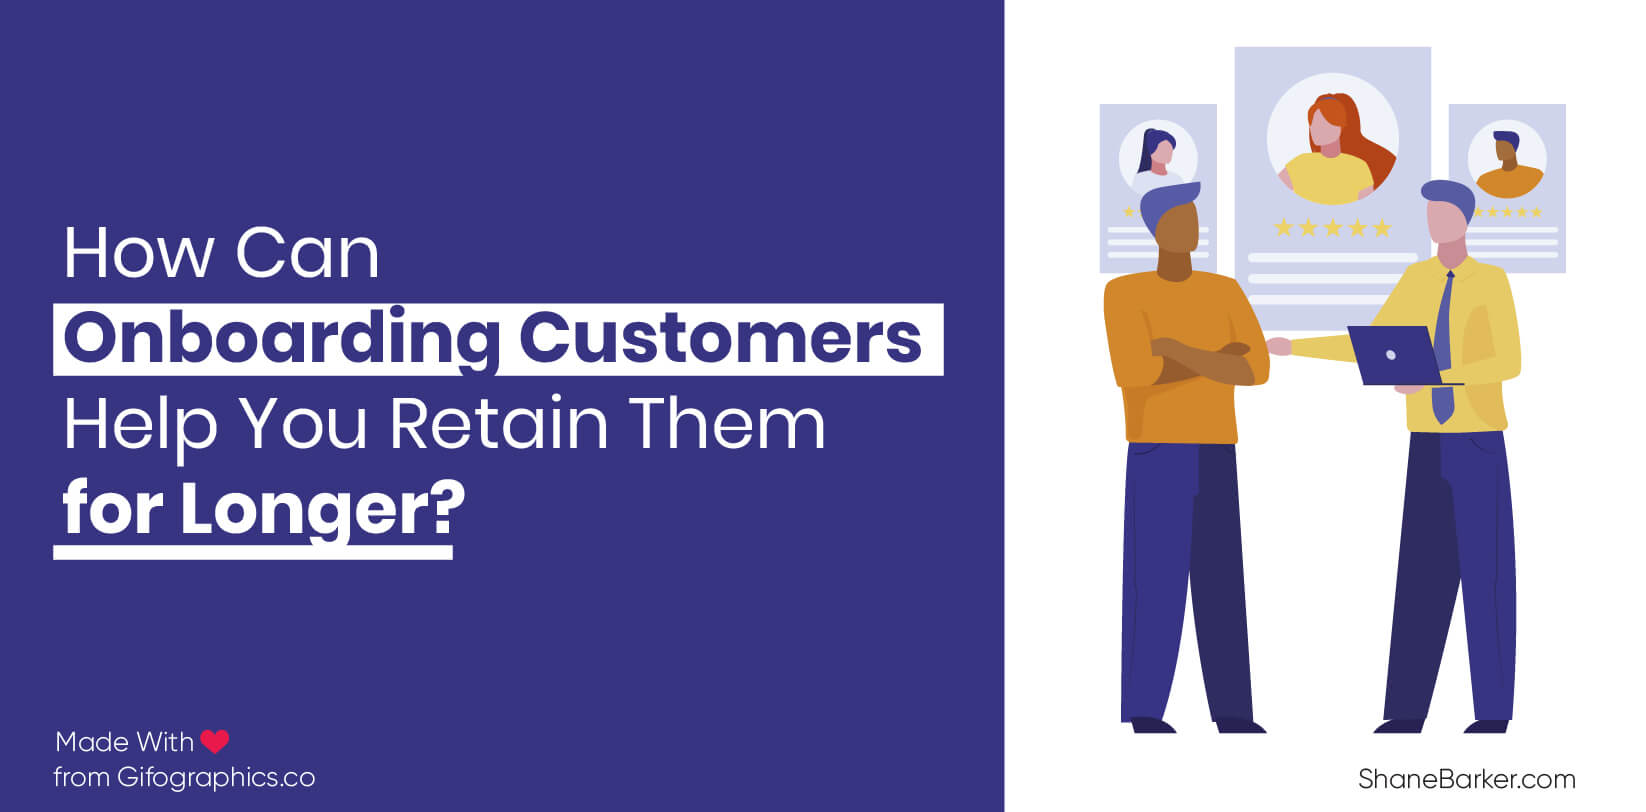 How Can Onboarding Customers Help You Retain Them for Longer?